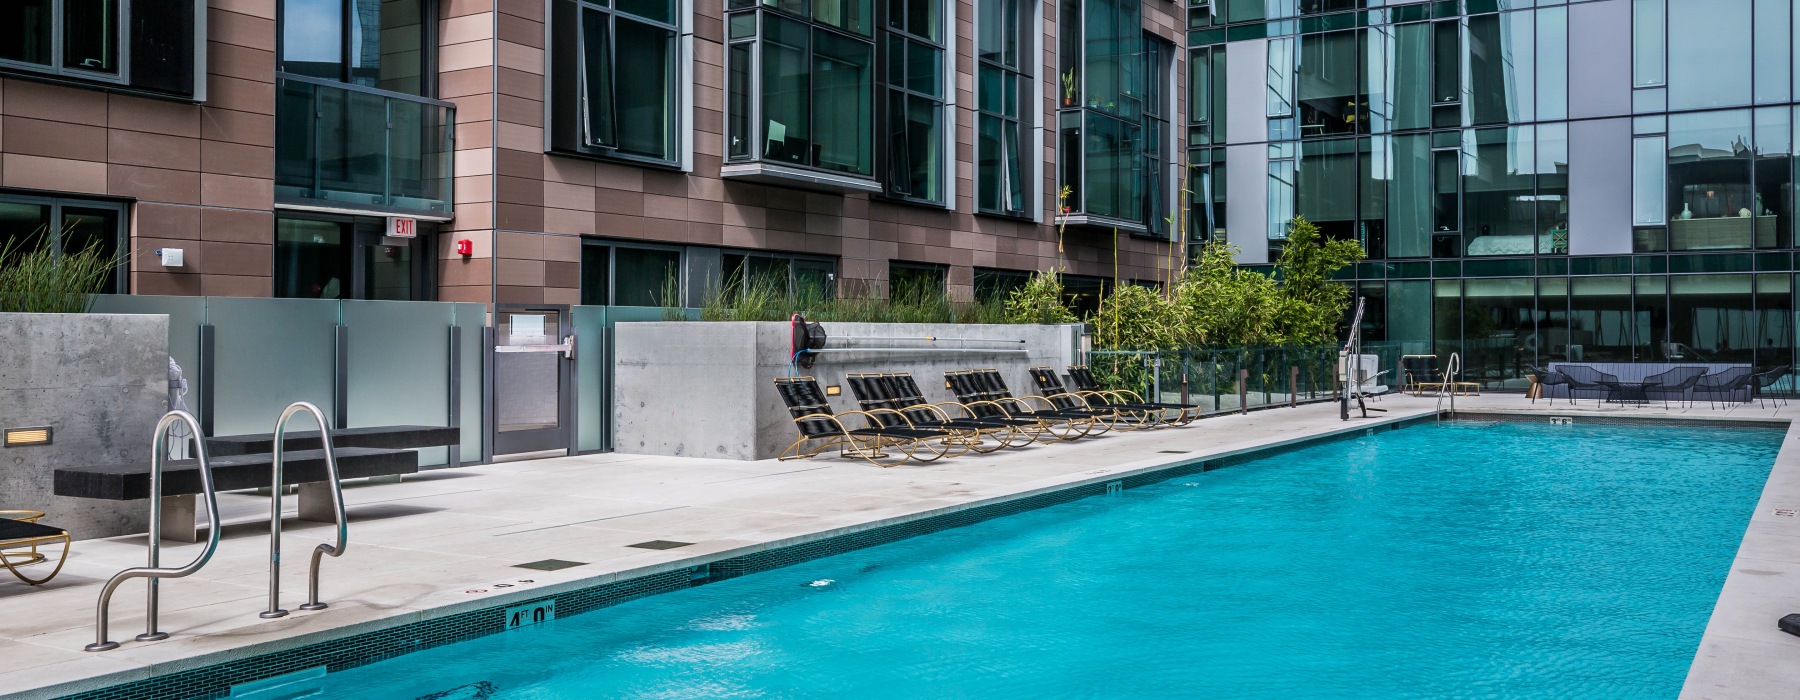 a pool in front of a building